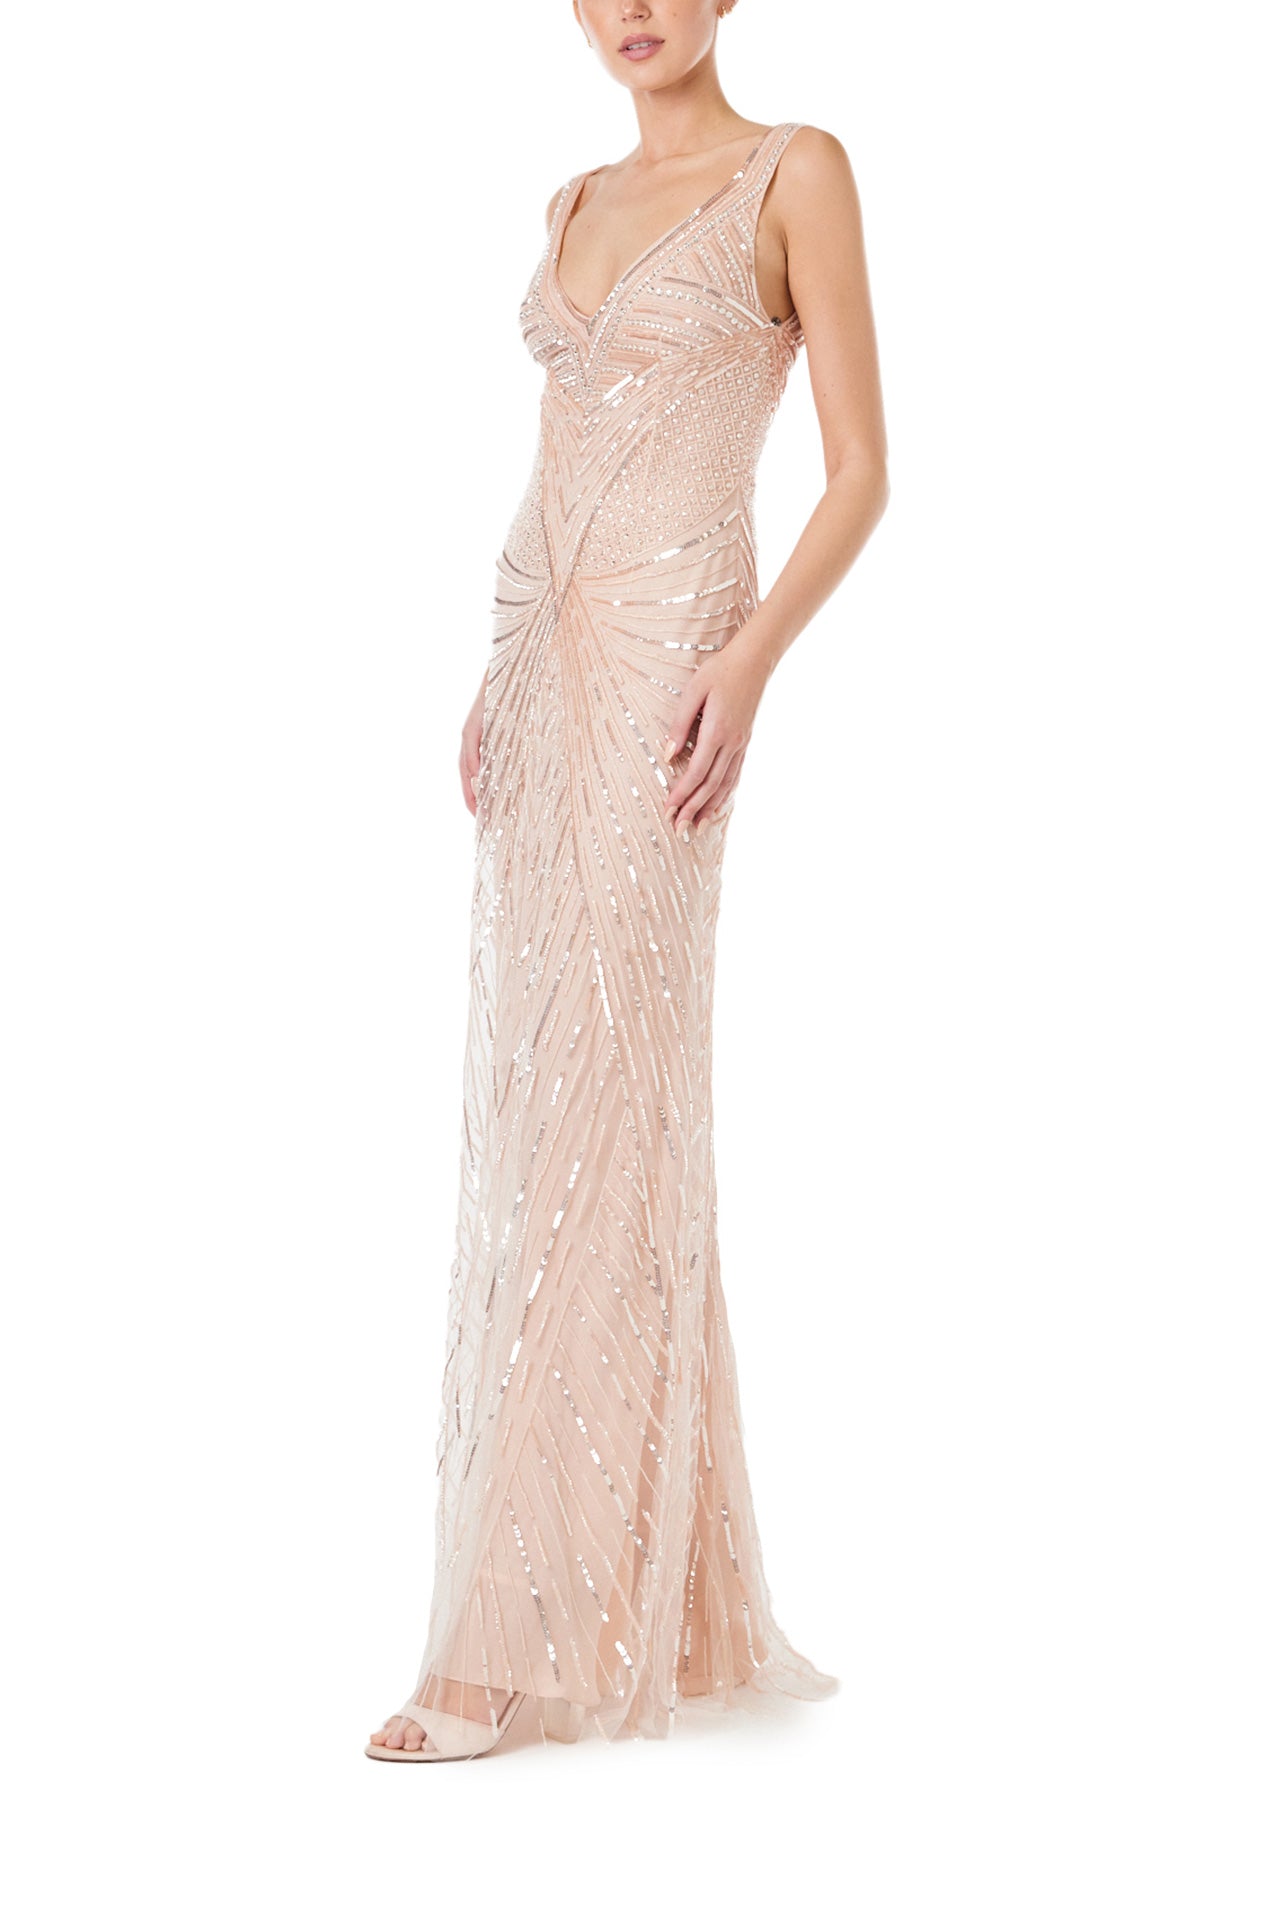 Monique Lhuillier Spring 2024 deep V-neck gown with wide straps in metallic and tonal embroidered tulle - side.